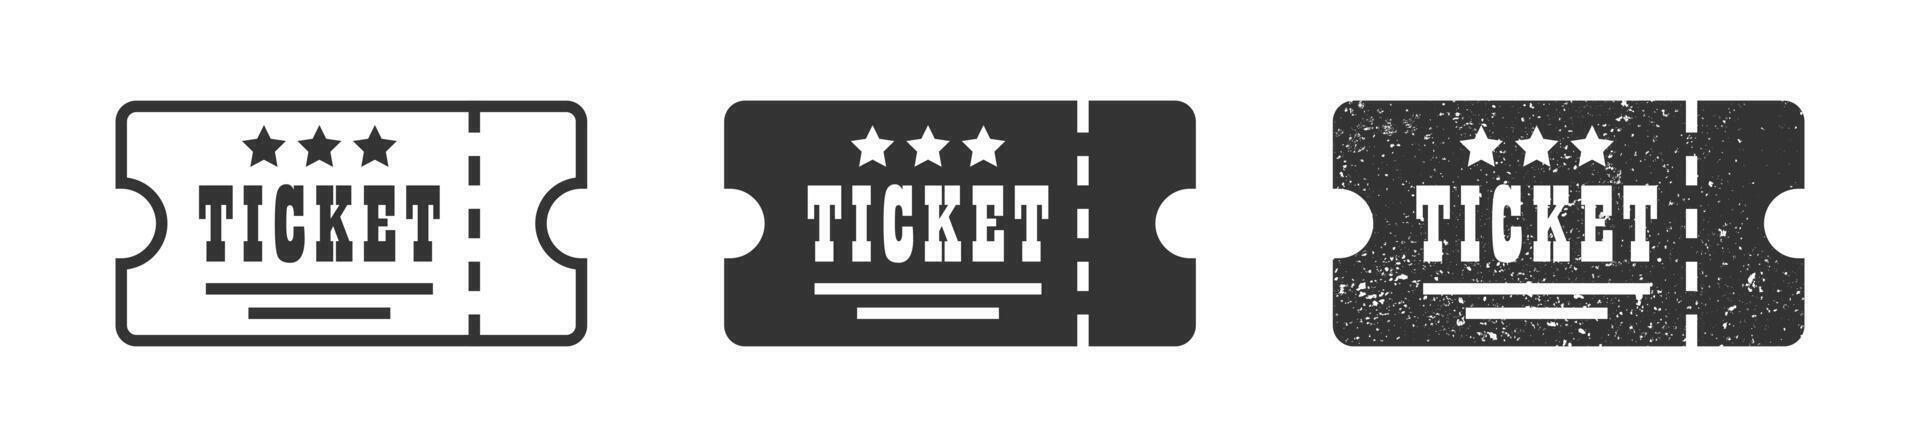 Ticket icon. Line flat and grunge texture ticket icon. Vector illustration.